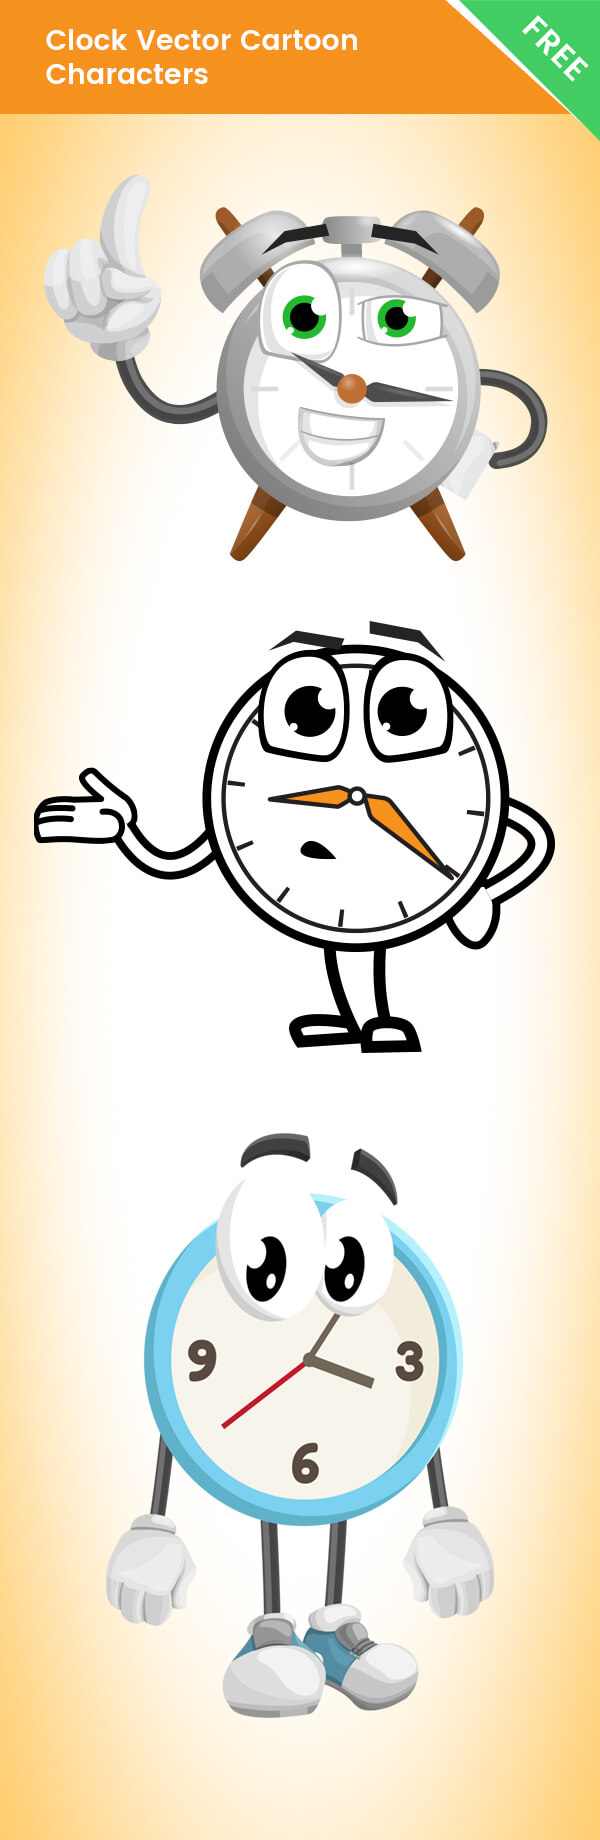 Clock Vector Cartoon Characters - Free Collection